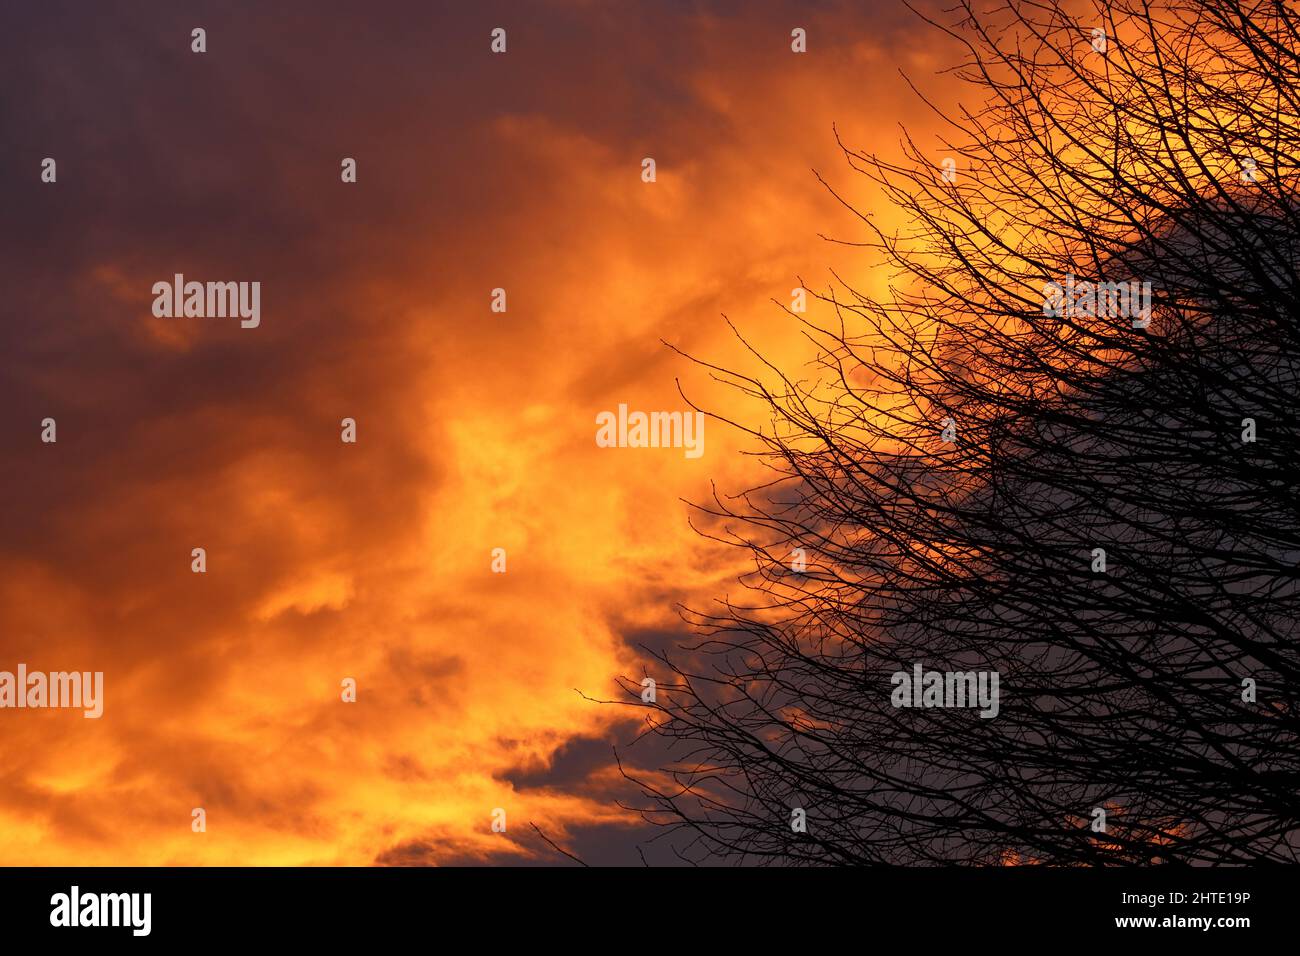 dark branches of a tree in front of dark and orange-red clouds in the evening sky during stormy weather, copy space Stock Photo